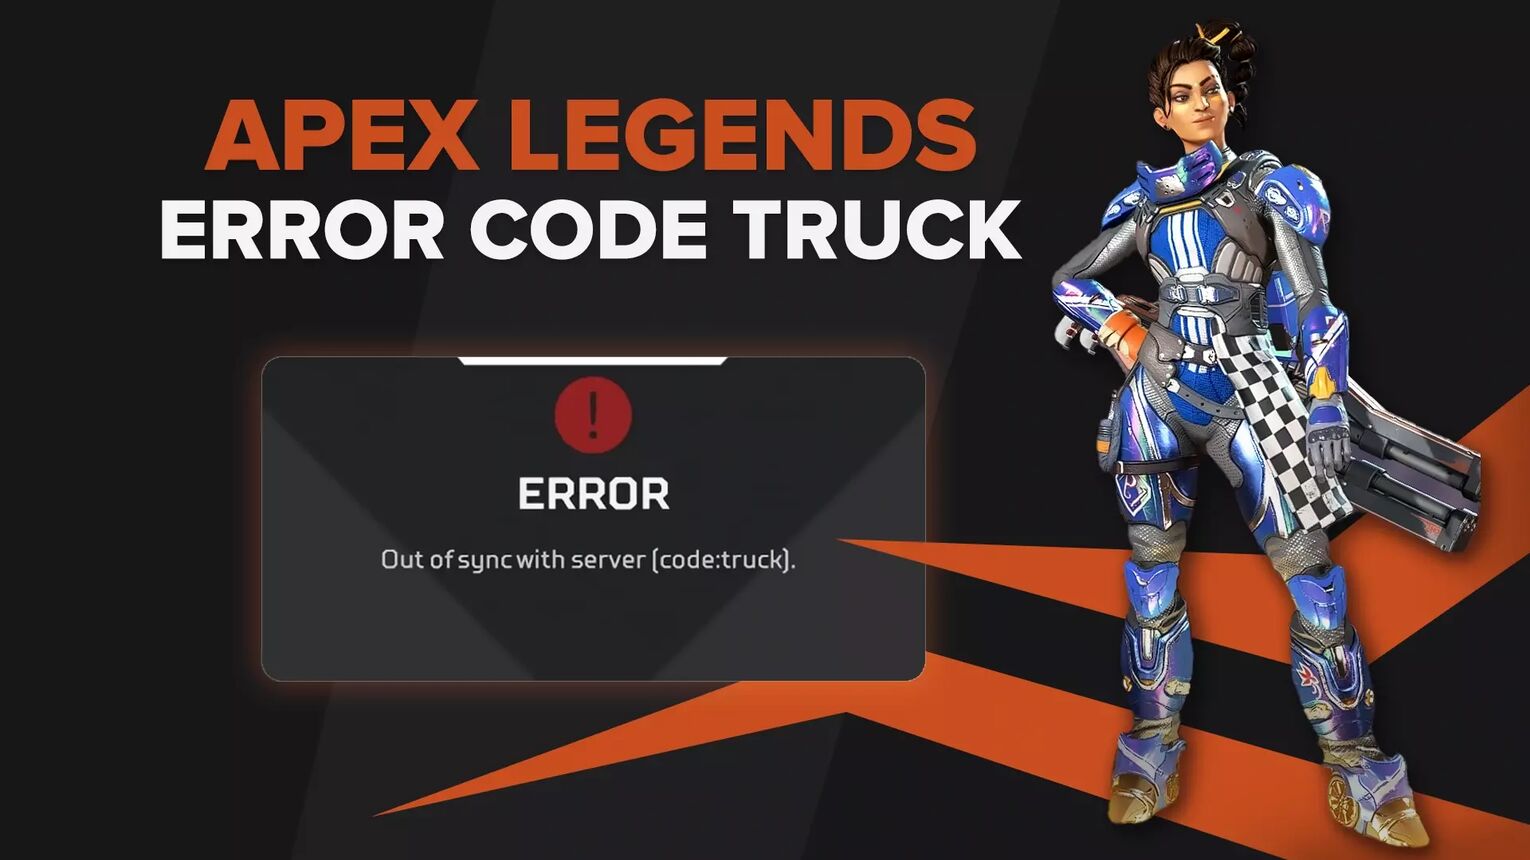 How to Fix The Code Truck Error in Apex Legends [Solved]